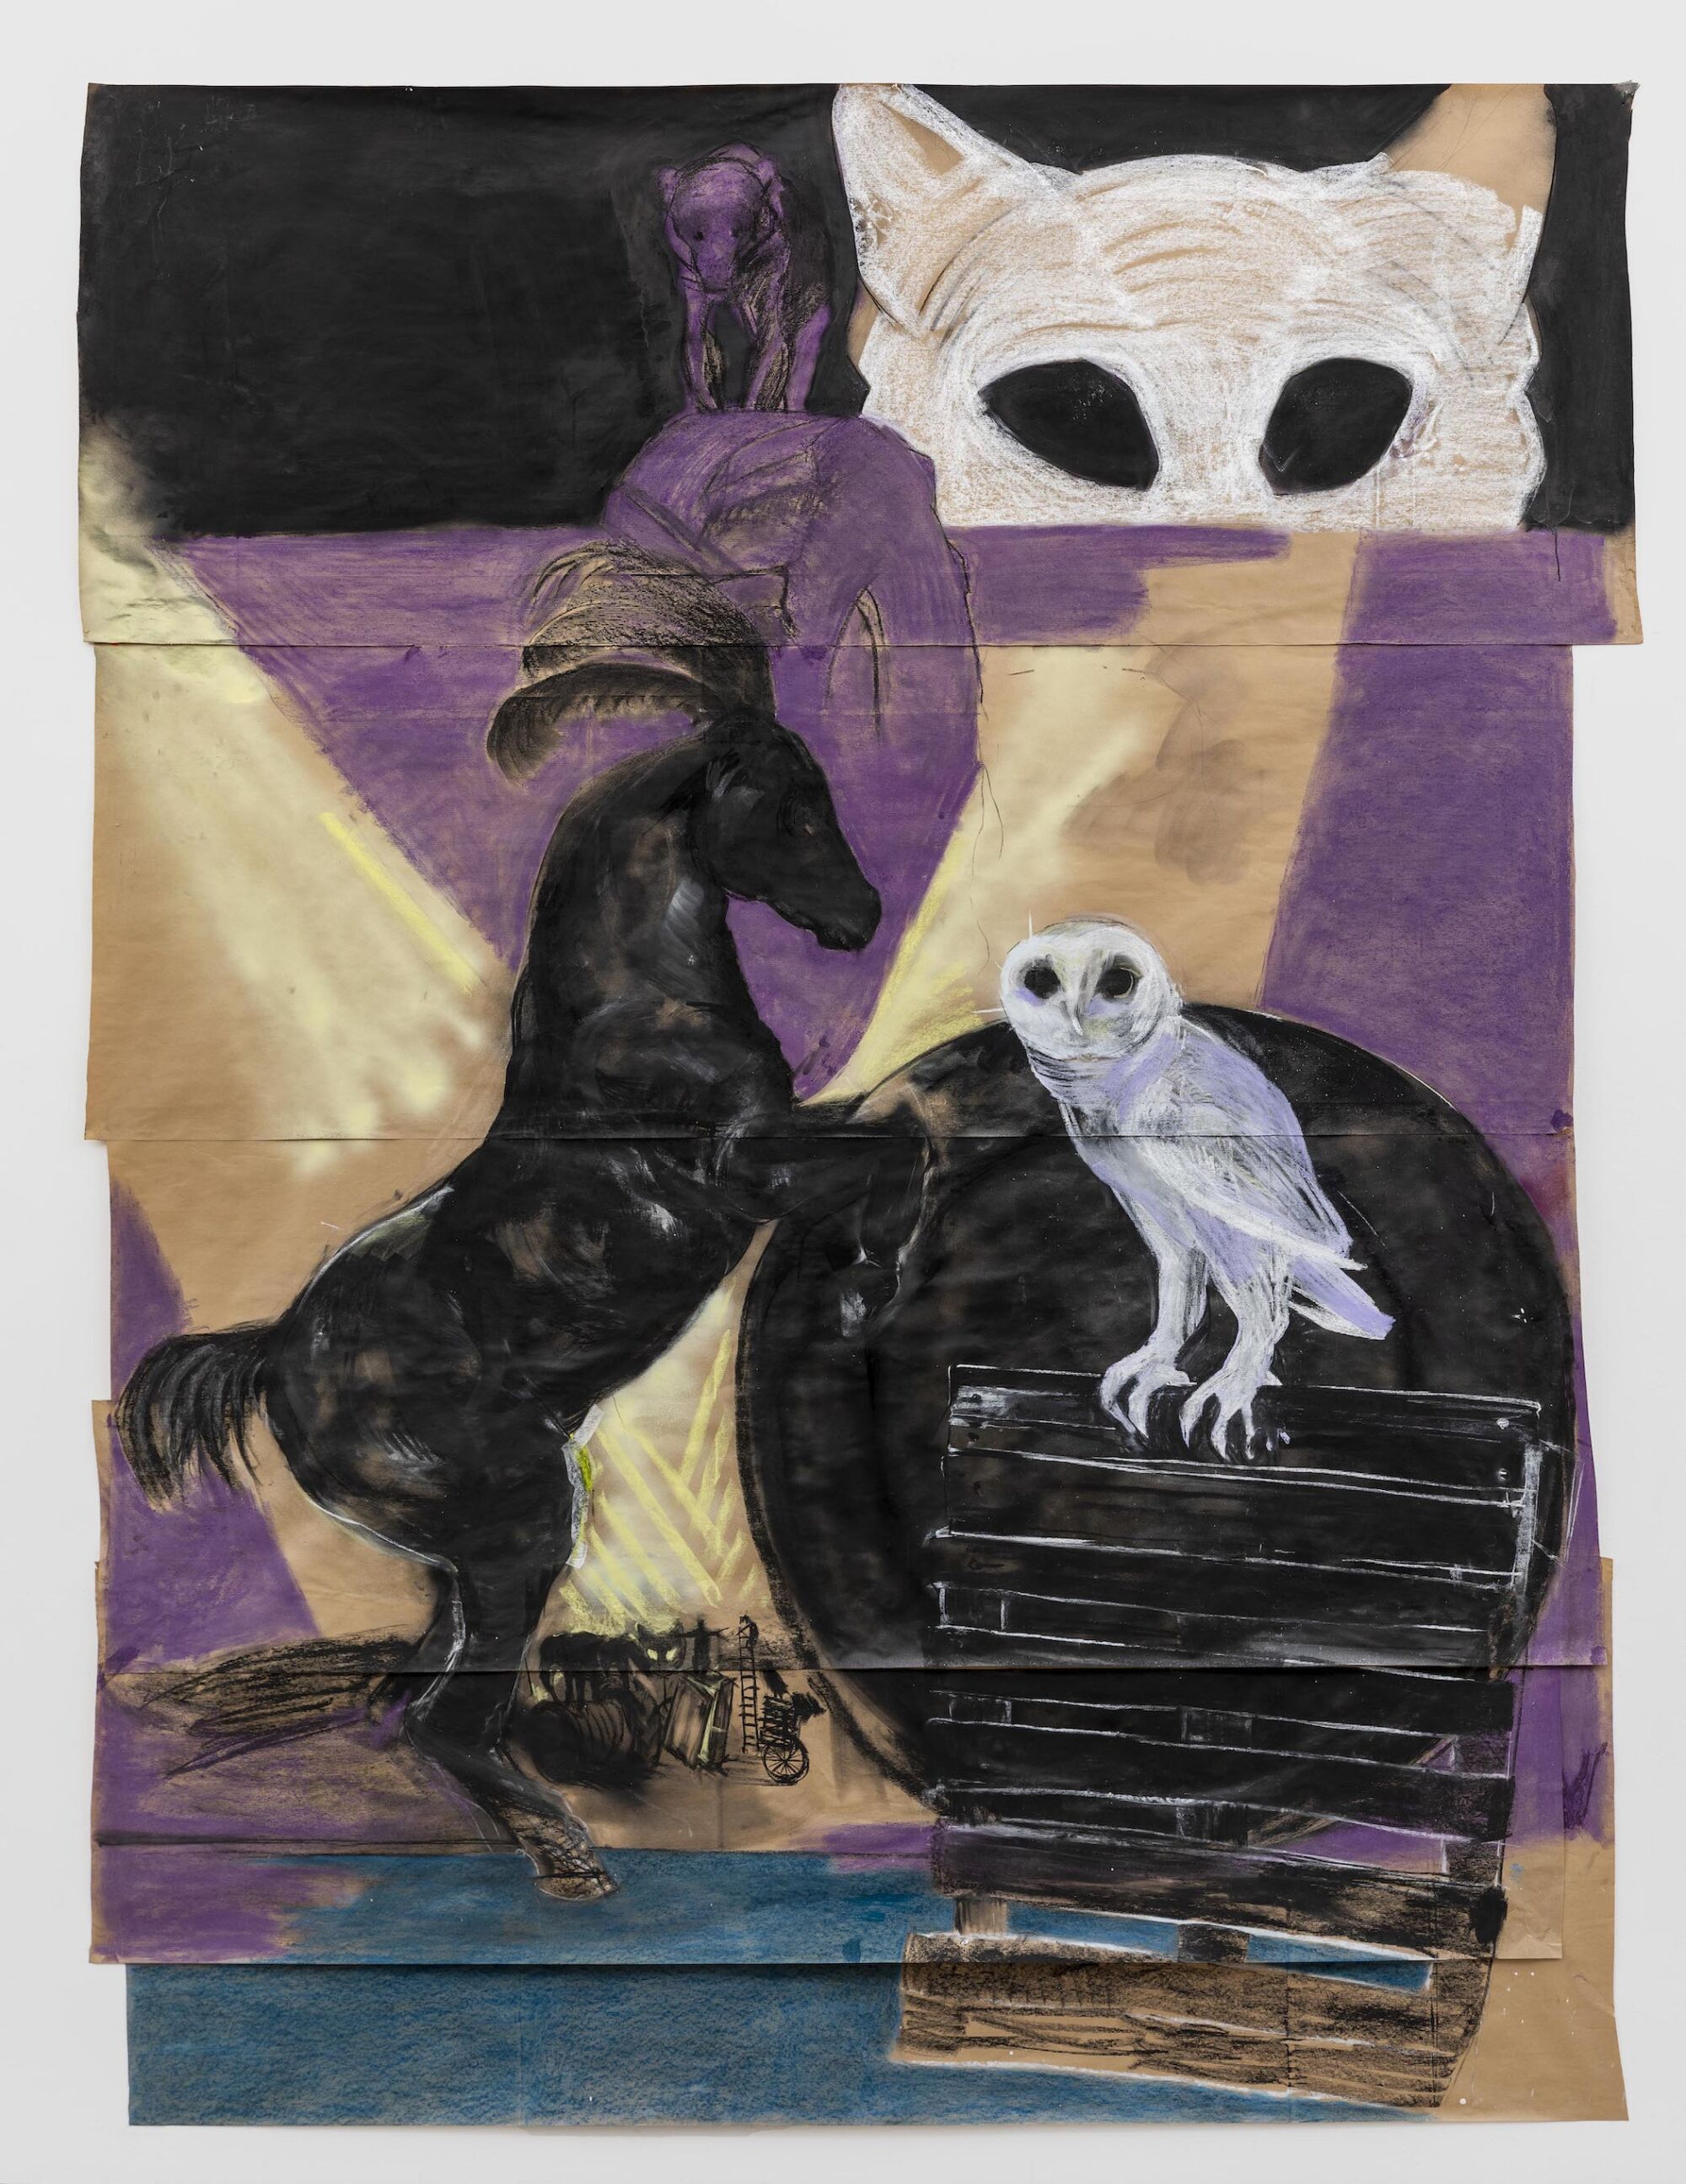 The Wick - An Owl on a Crate, 2021, Nicola Hicks